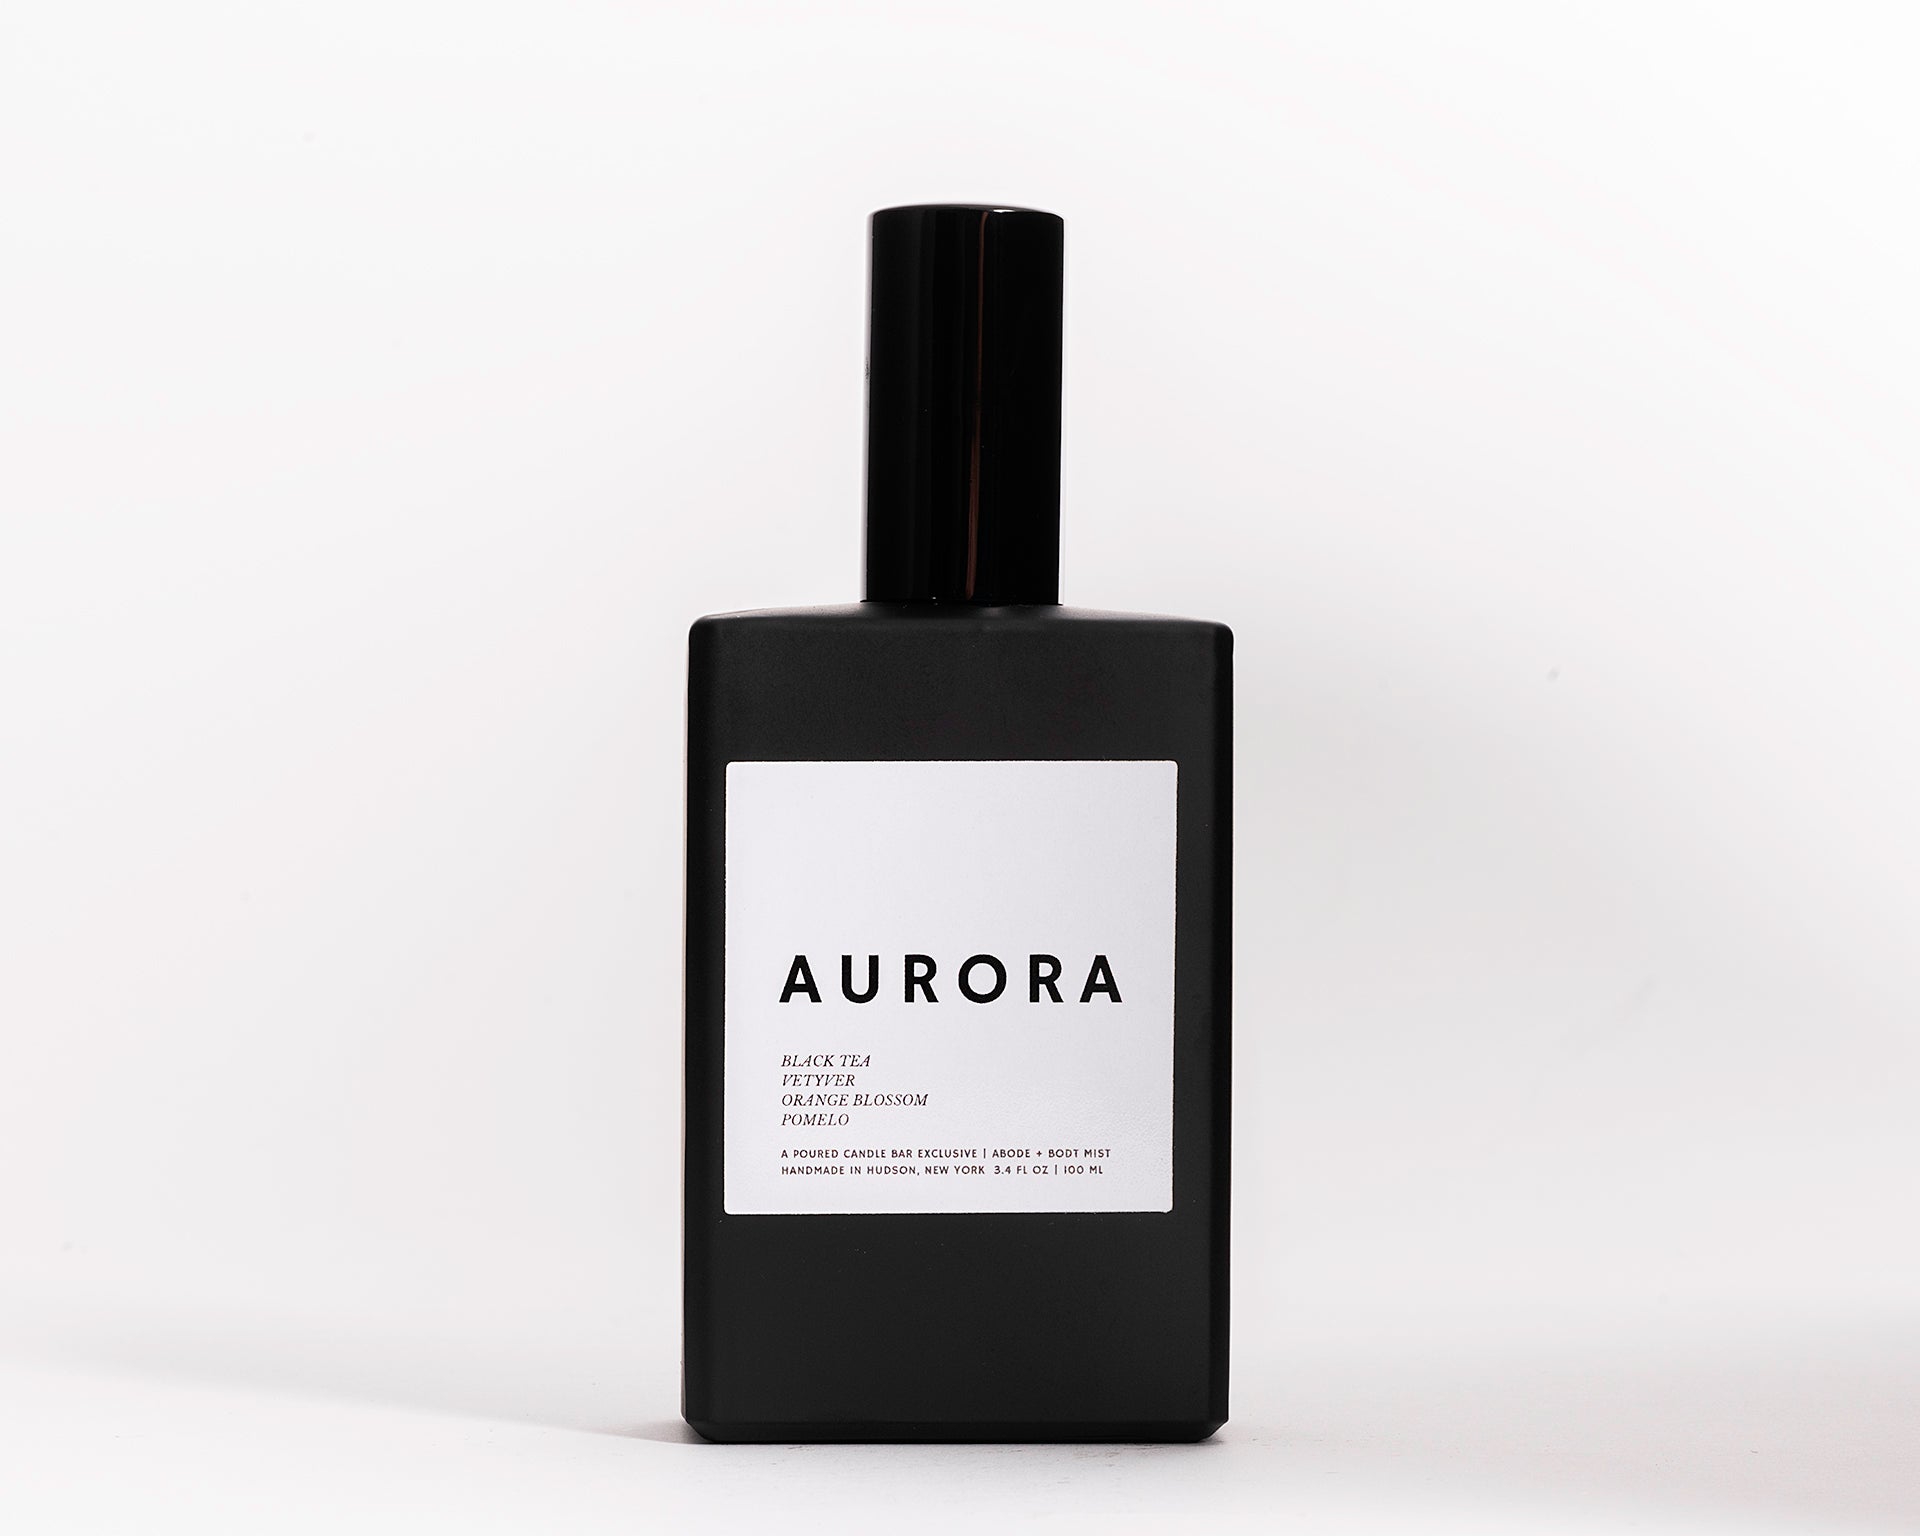 100 ml room spray in a black rectangular glass vessel. Profile Description: Faintly sweet + herbal, with subtle hits of white floral + citrus  Notes: Black Tea, Vetyver Root, Orange Blossom, Pomelo